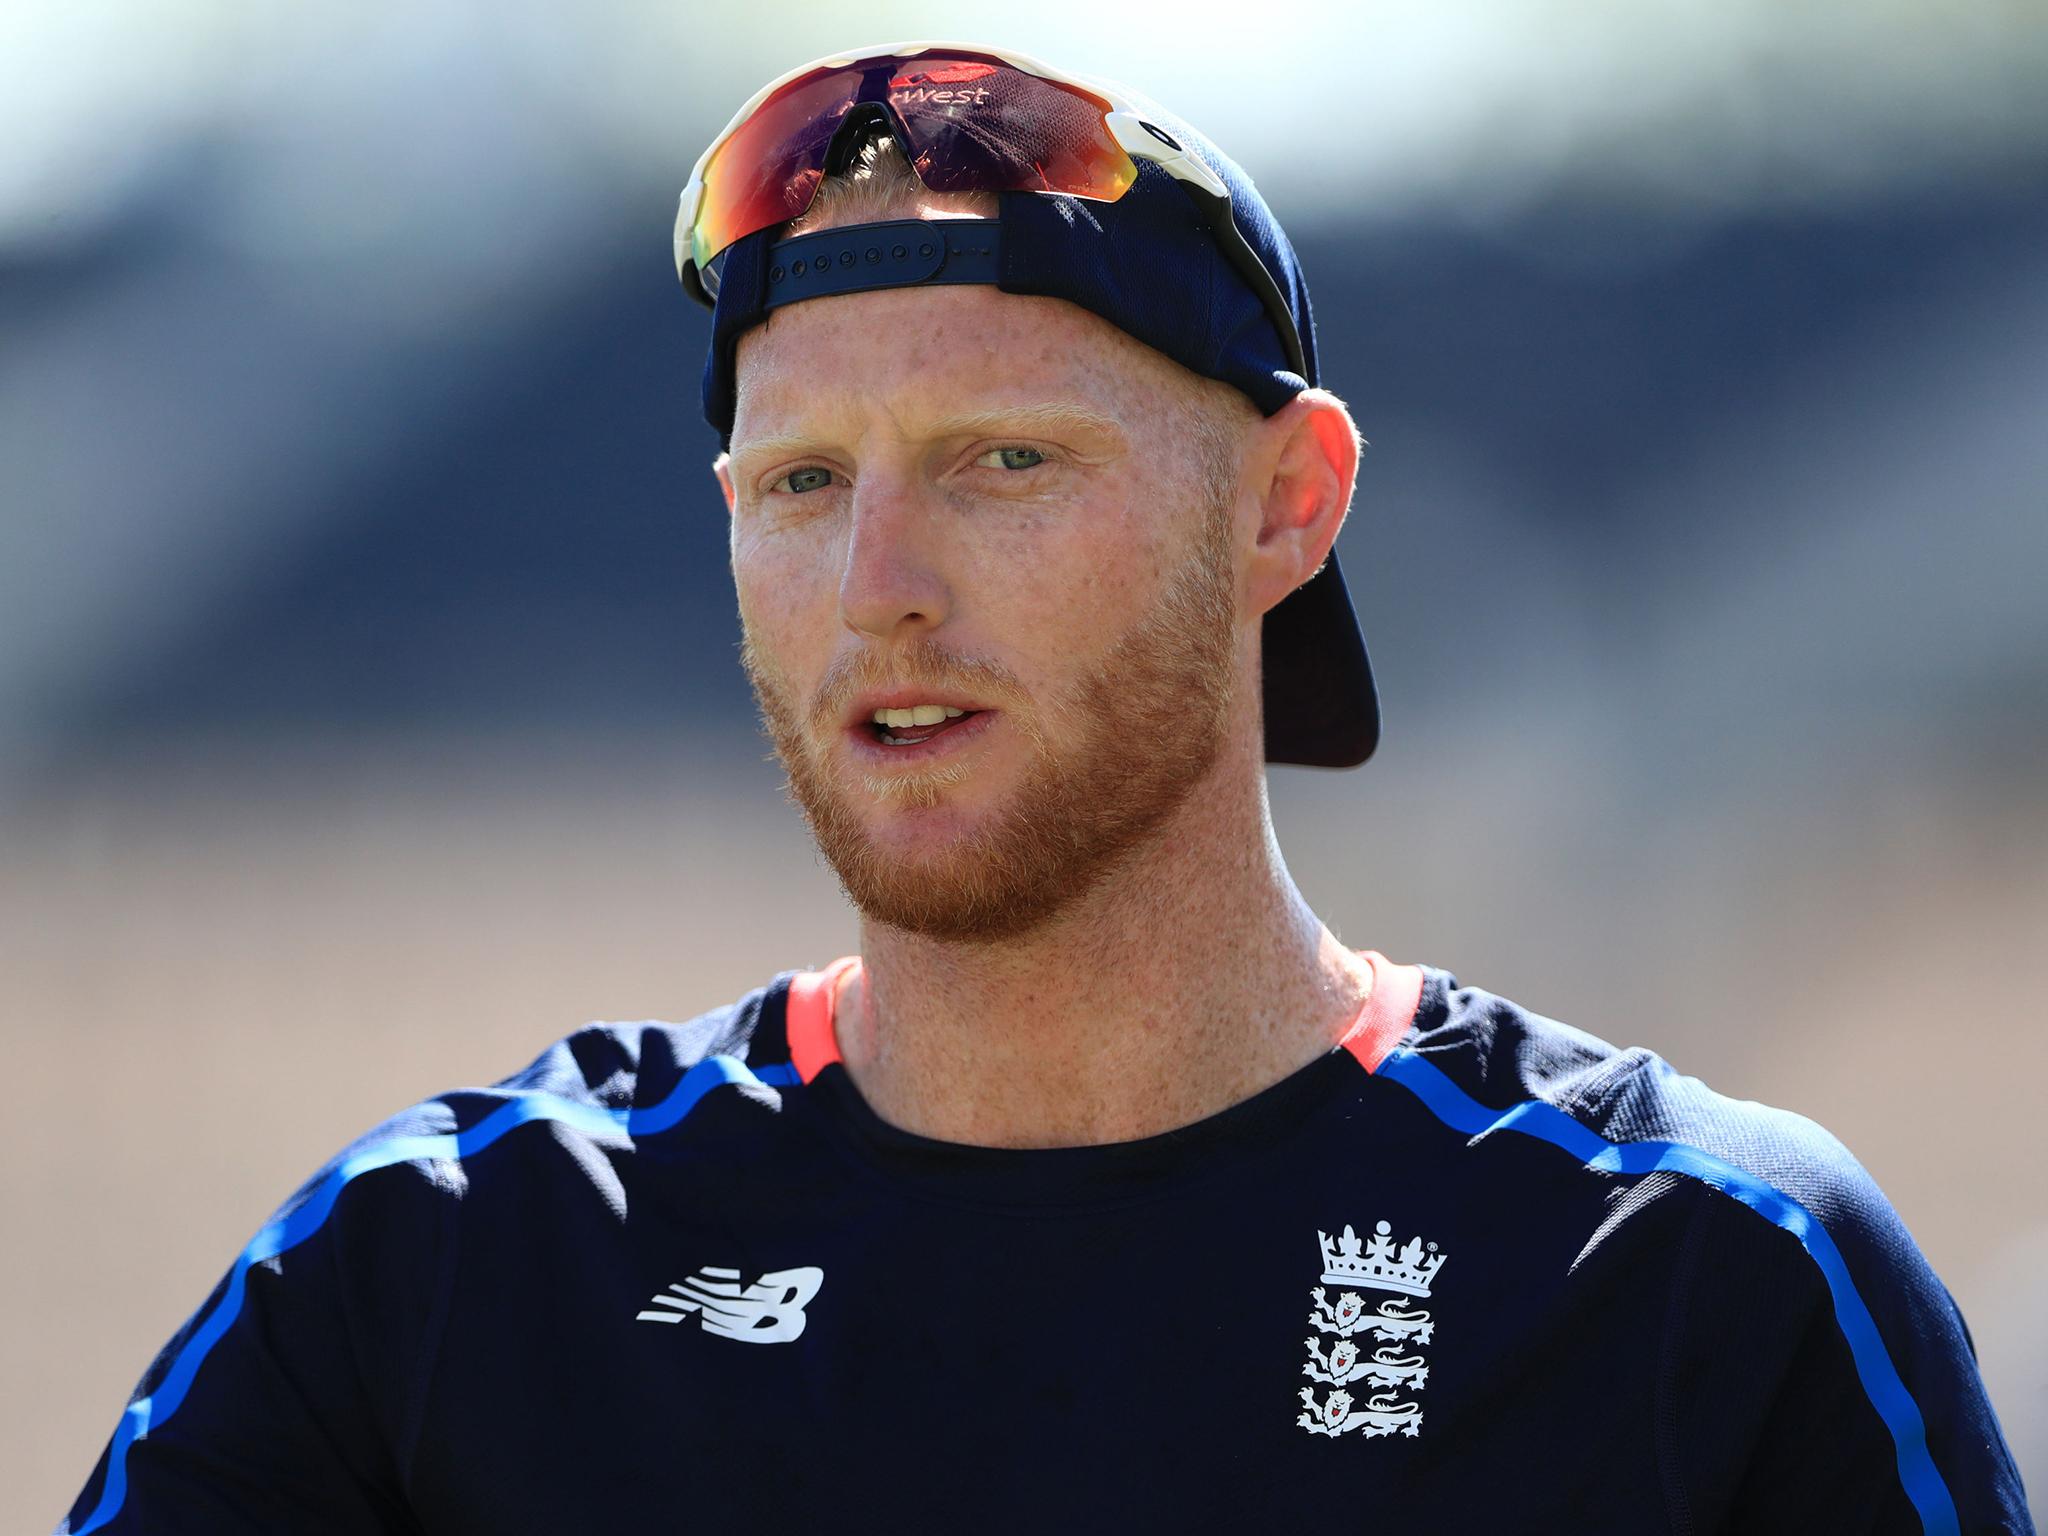 Ben Stokes will be considered for selection immediately after the ECB lifted the suspension